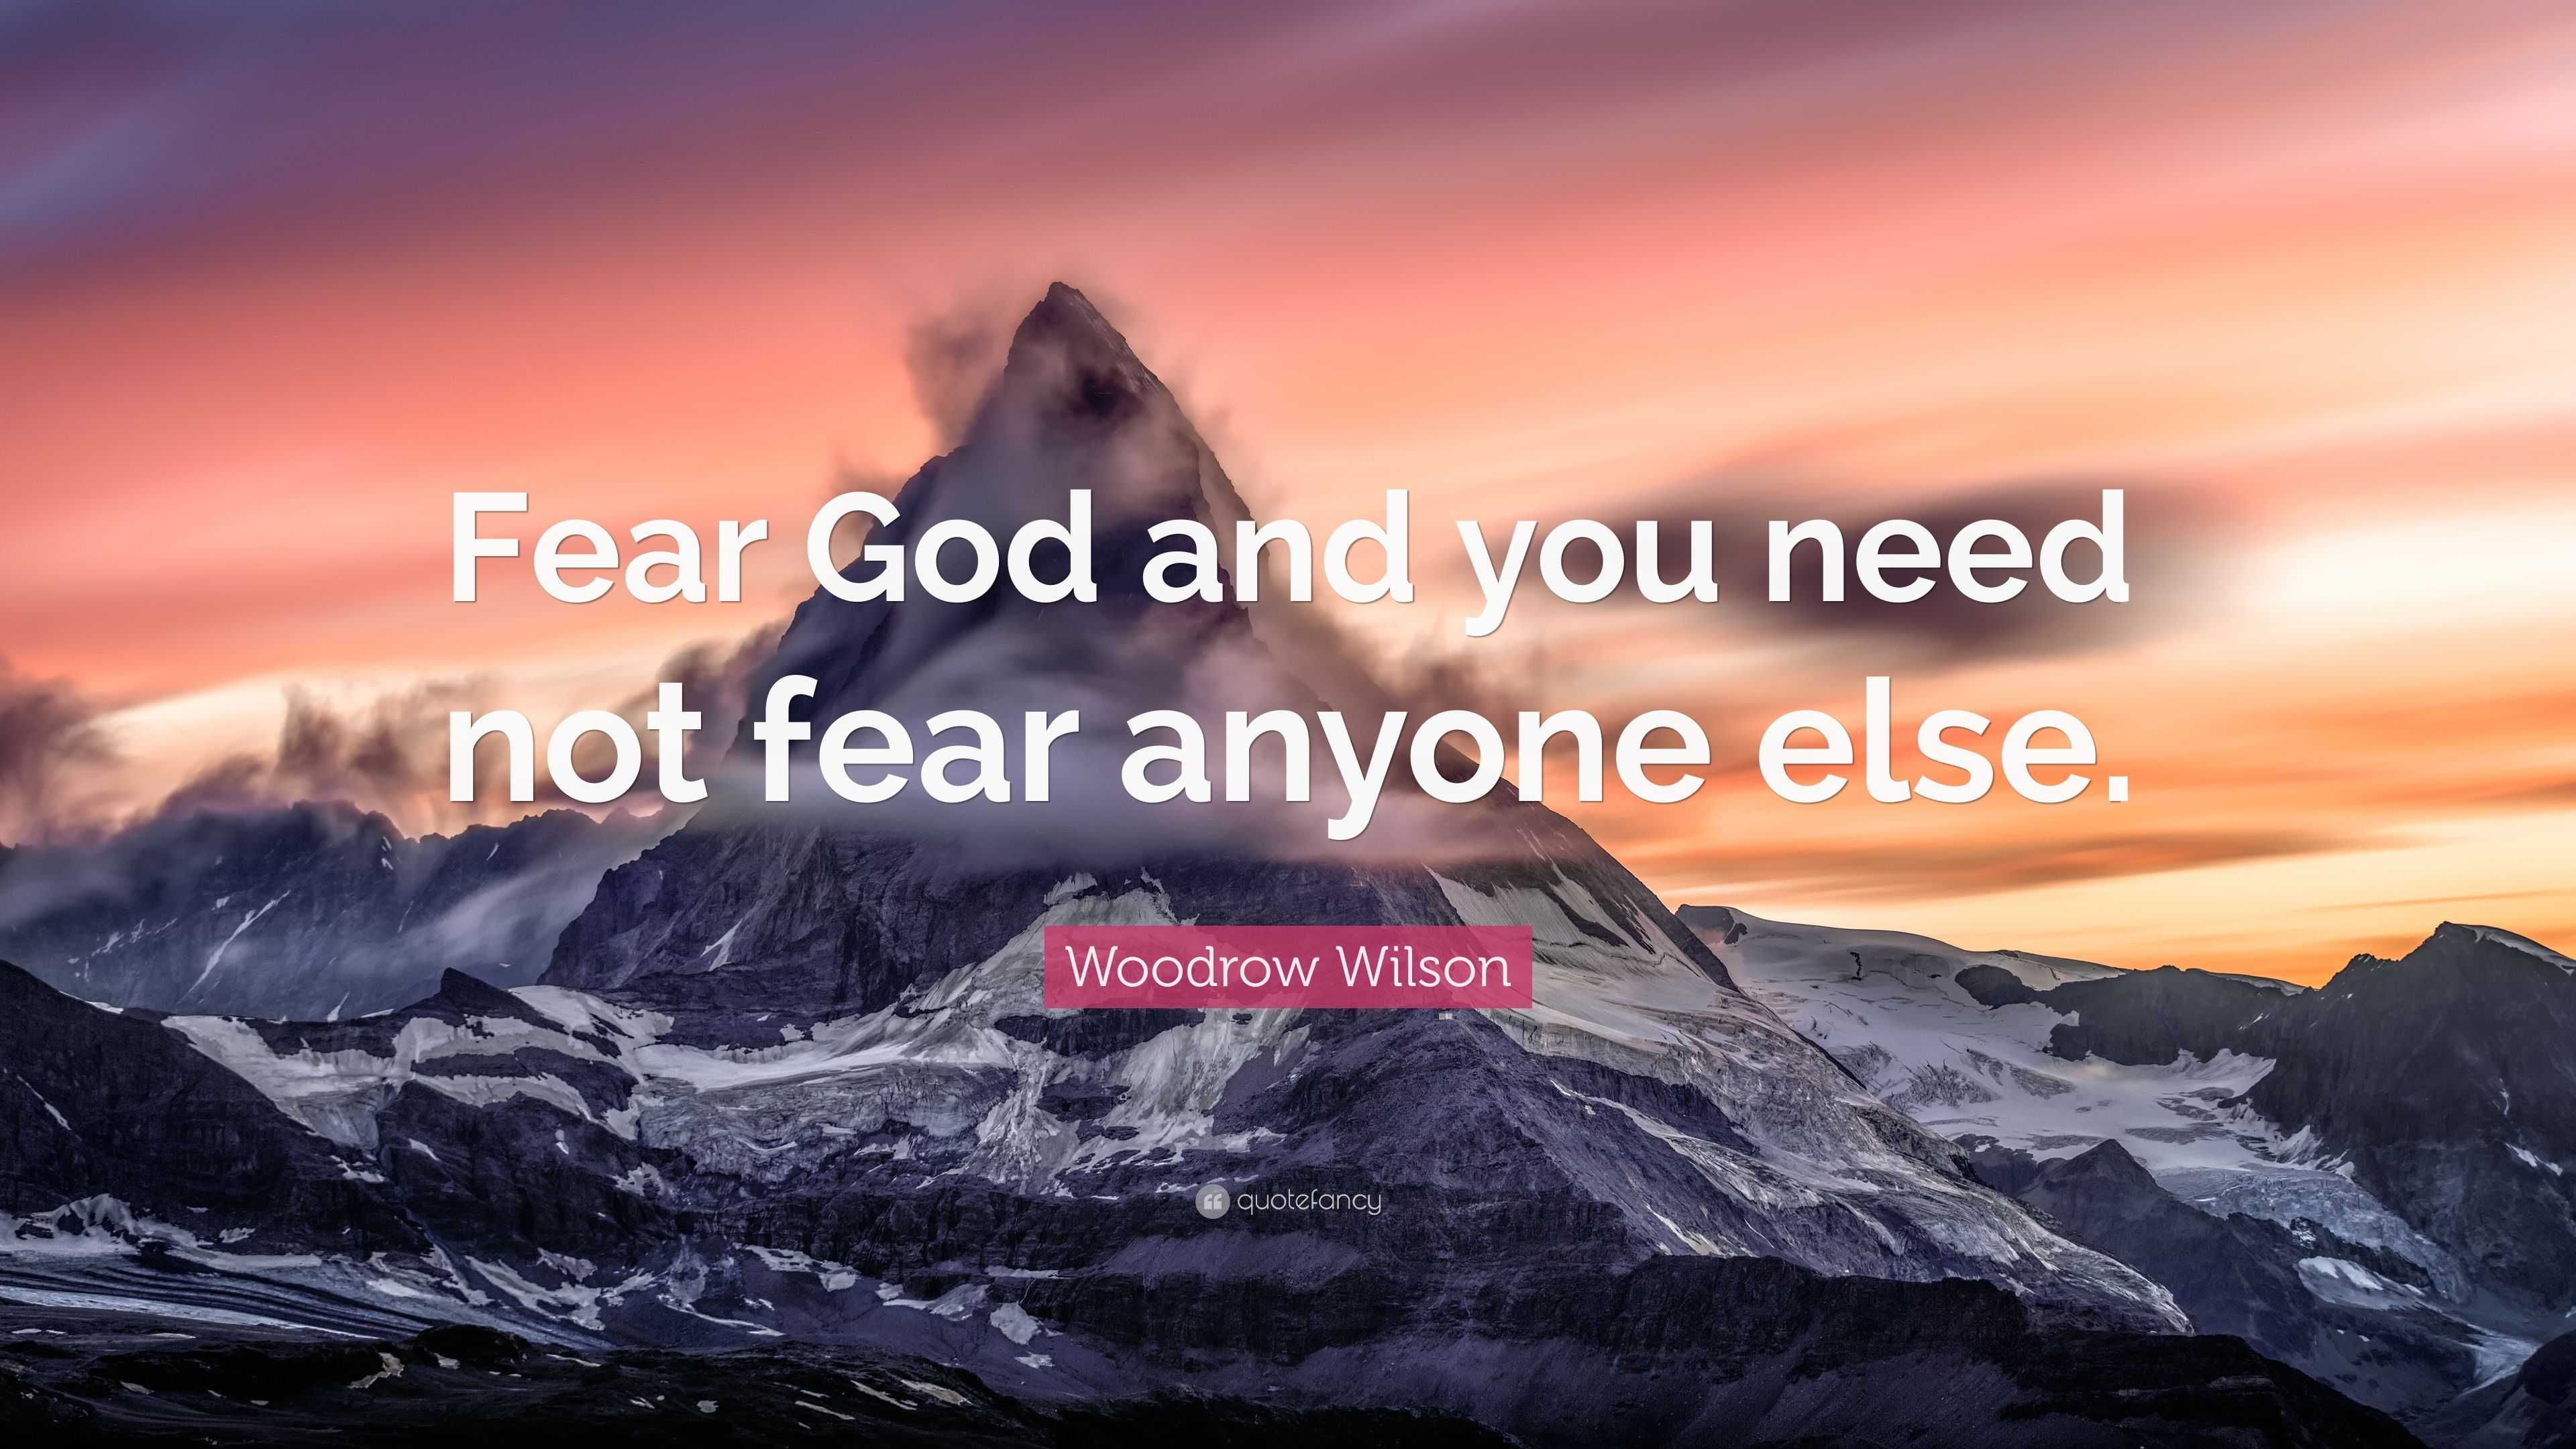 woodrow-wilson-quote-fear-god-and-you-need-not-fear-anyone-else